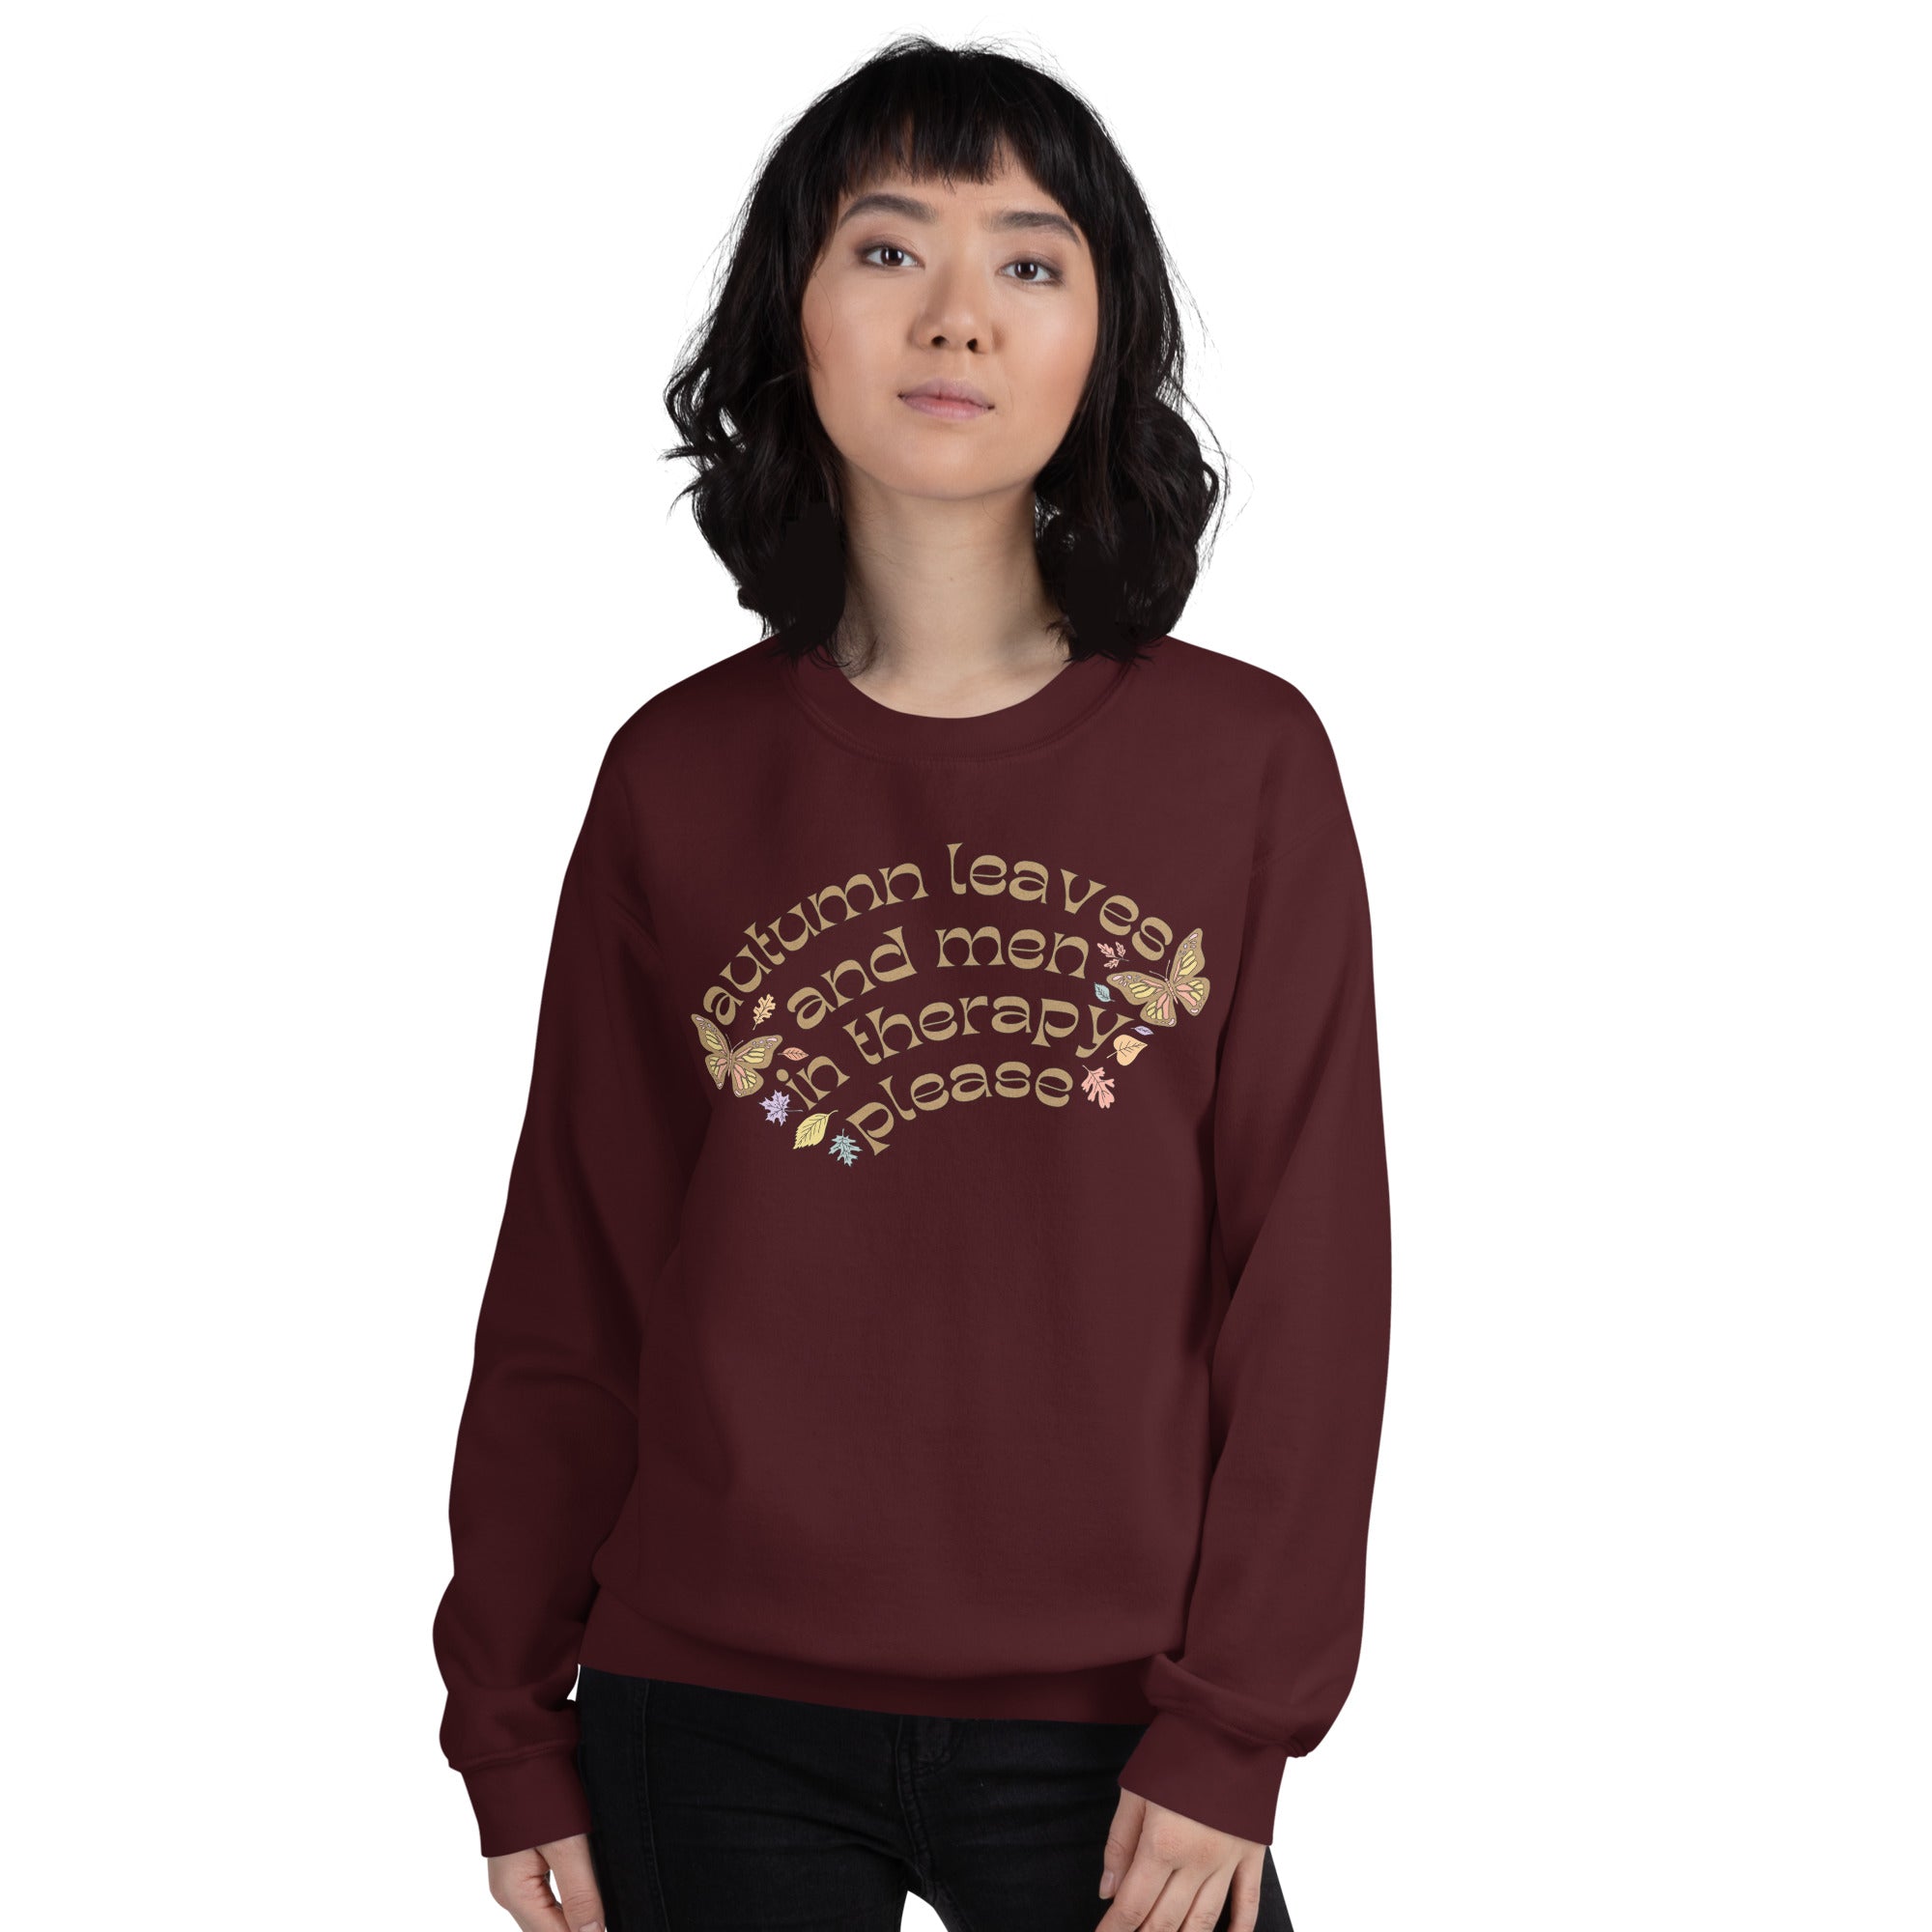 Autumn Leaves And Men In Therapy Please Unisex Sweatshirt